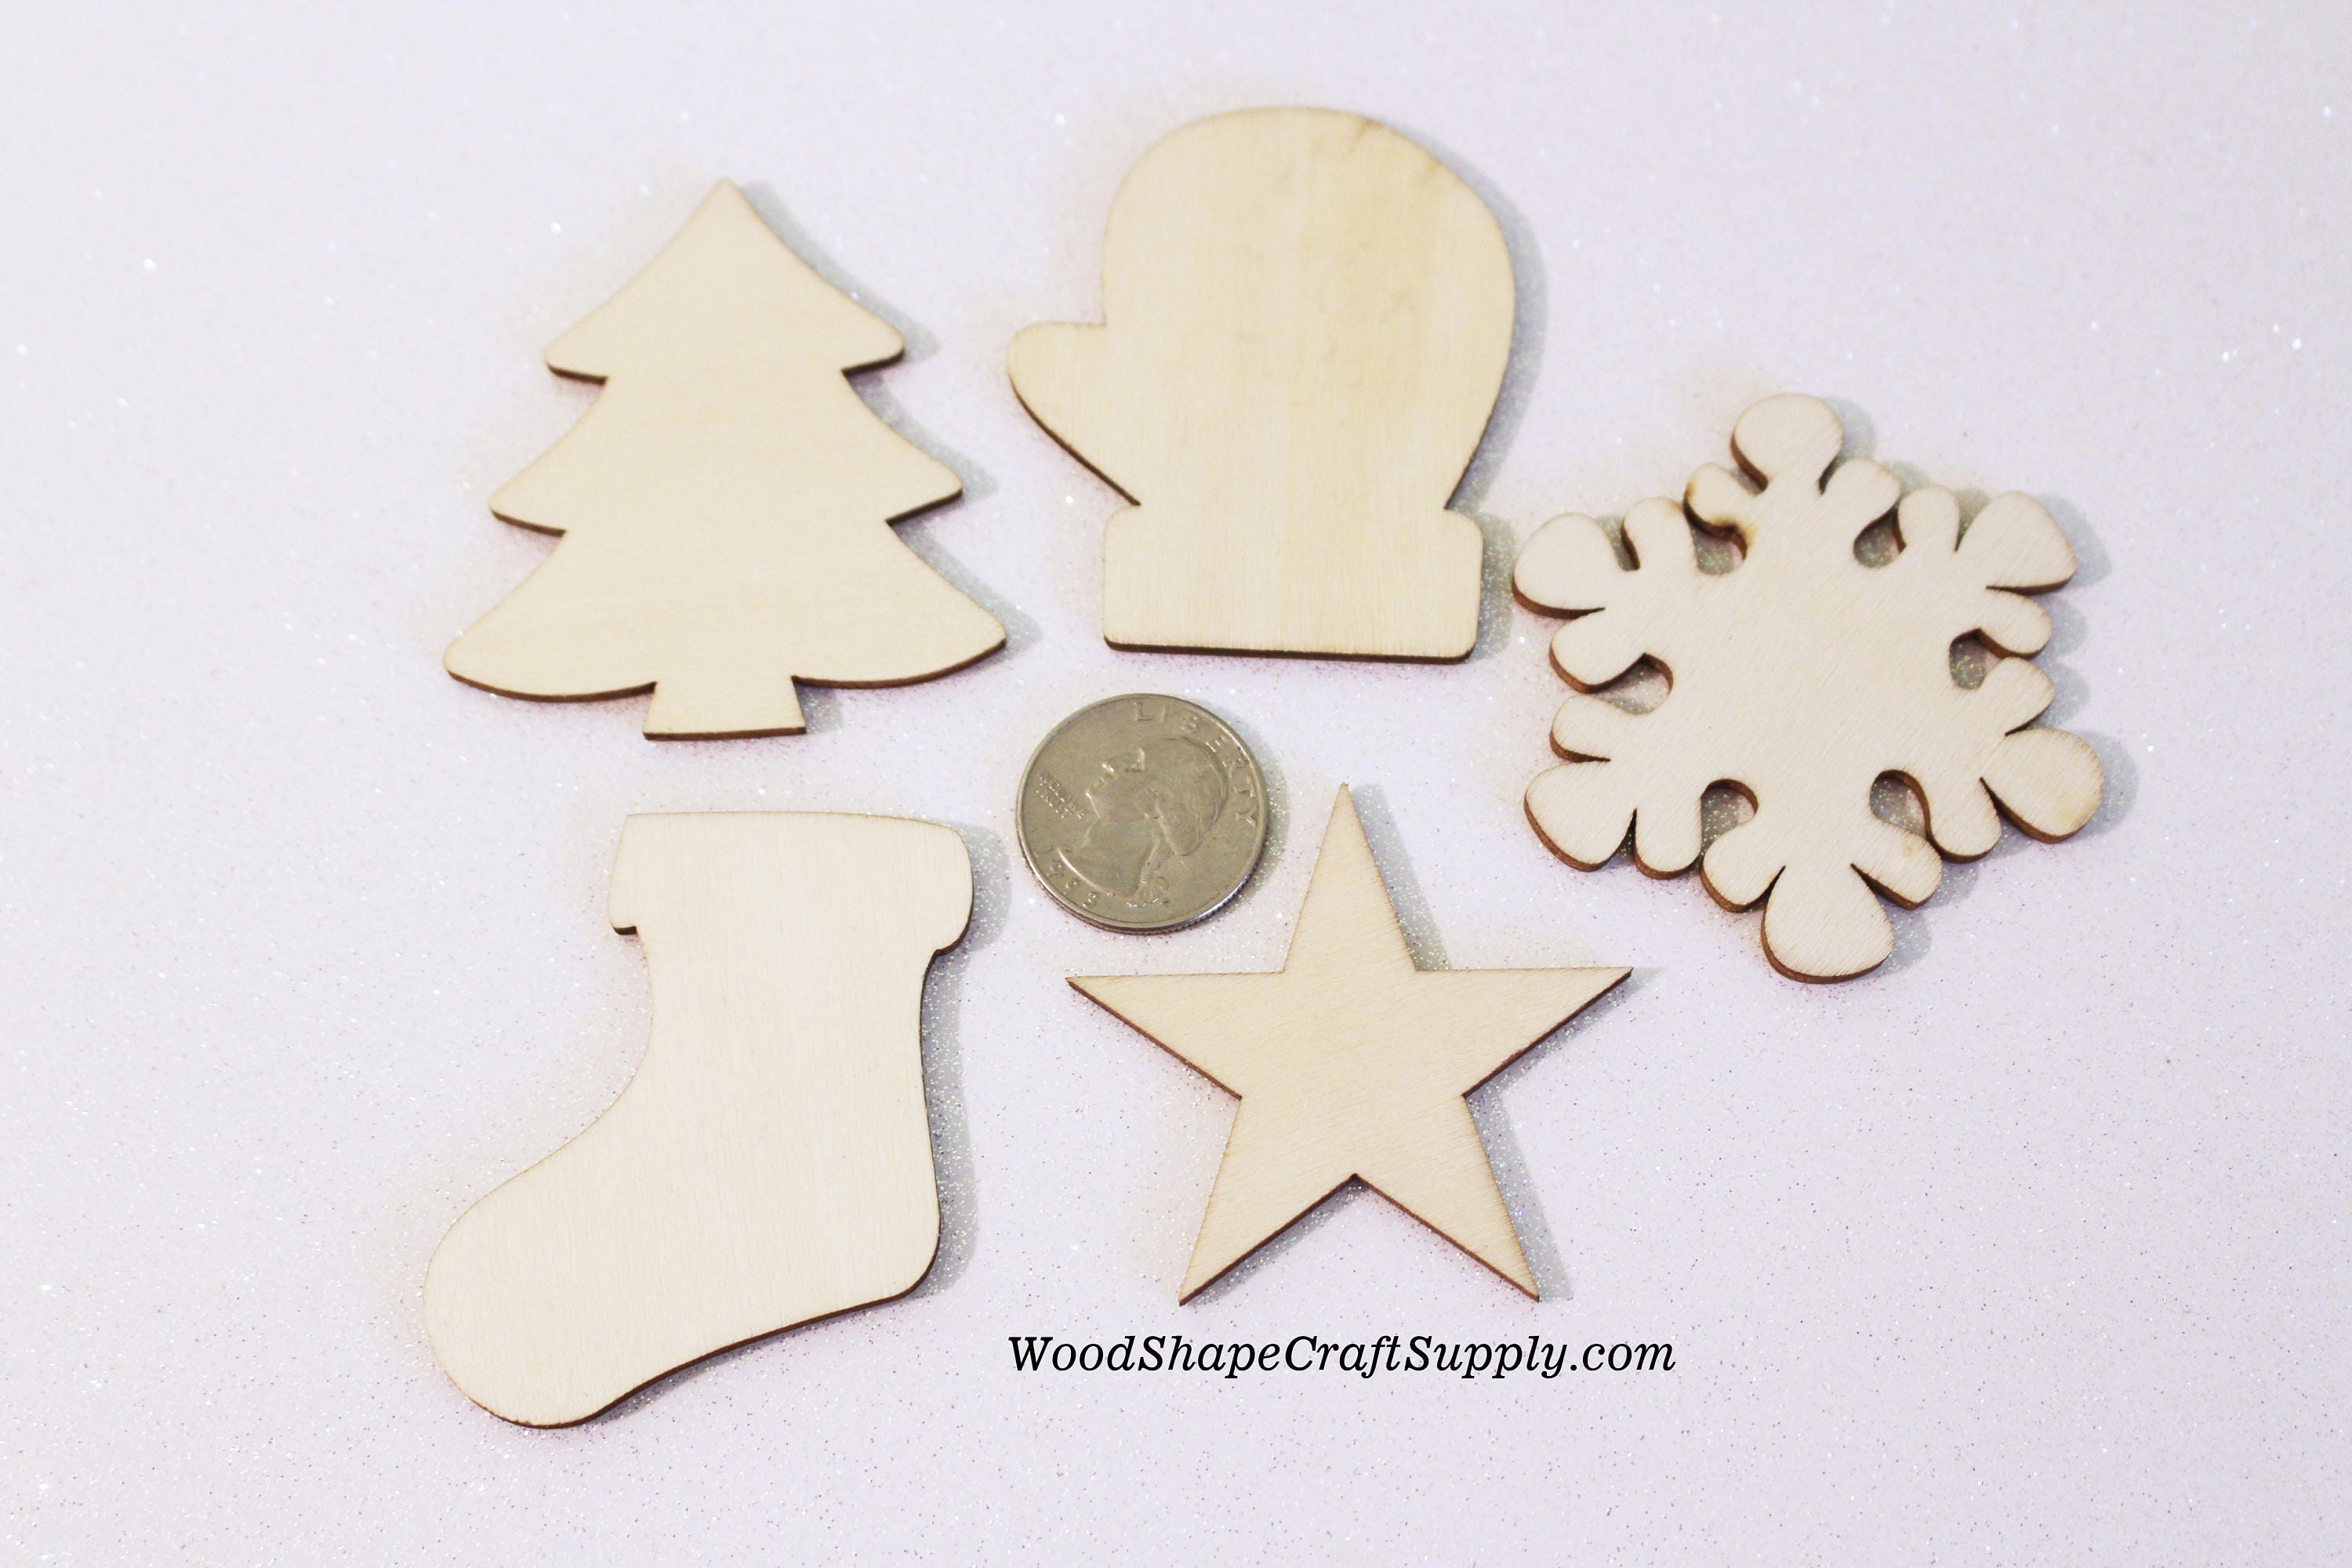 Wooden Christmas Shapes, Buy Wood Craft Supplies for Winter